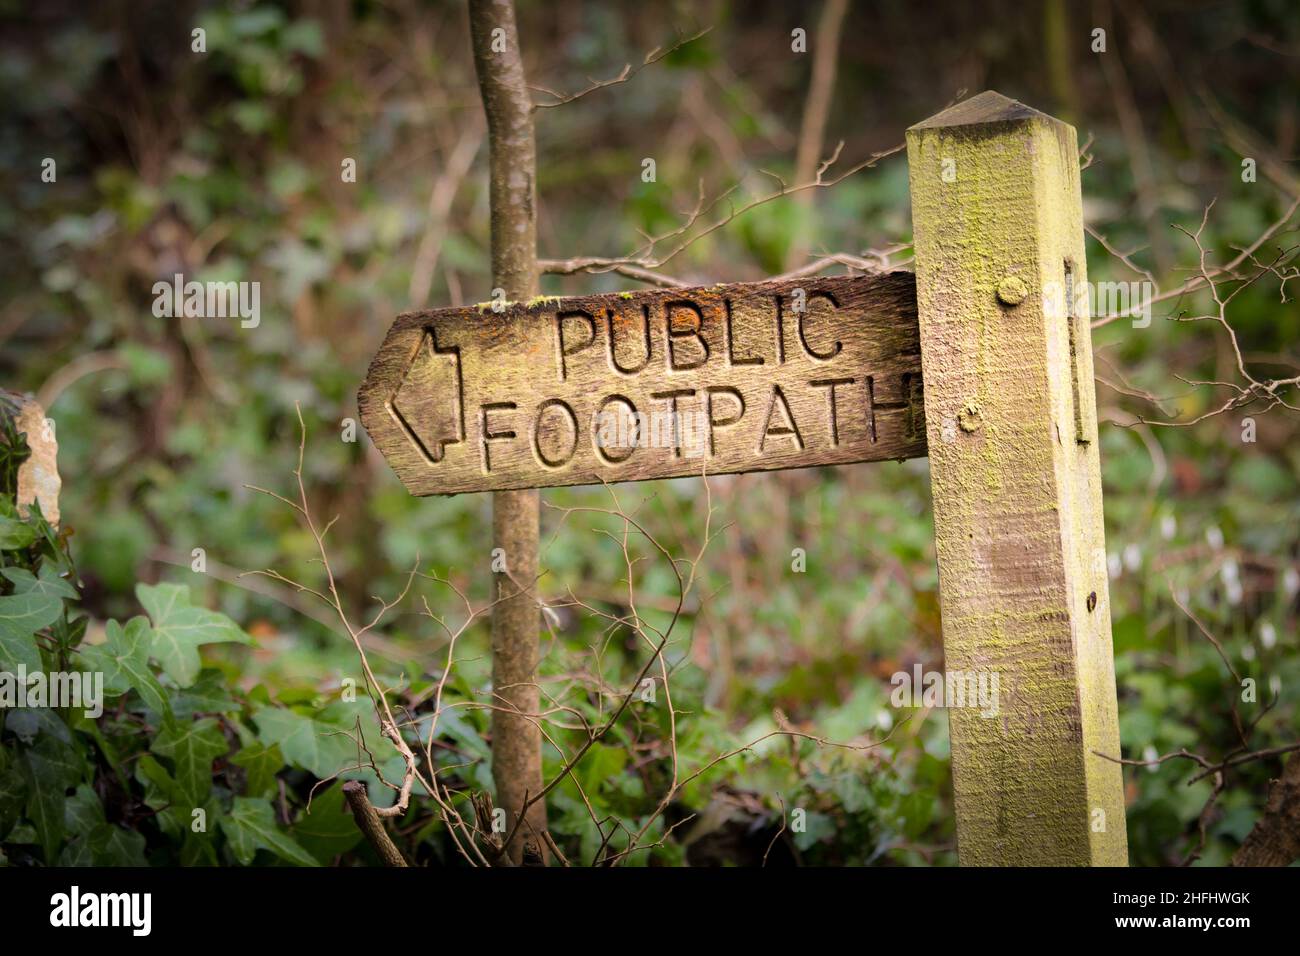 A deteriorating public footpath signpost Stock Photo